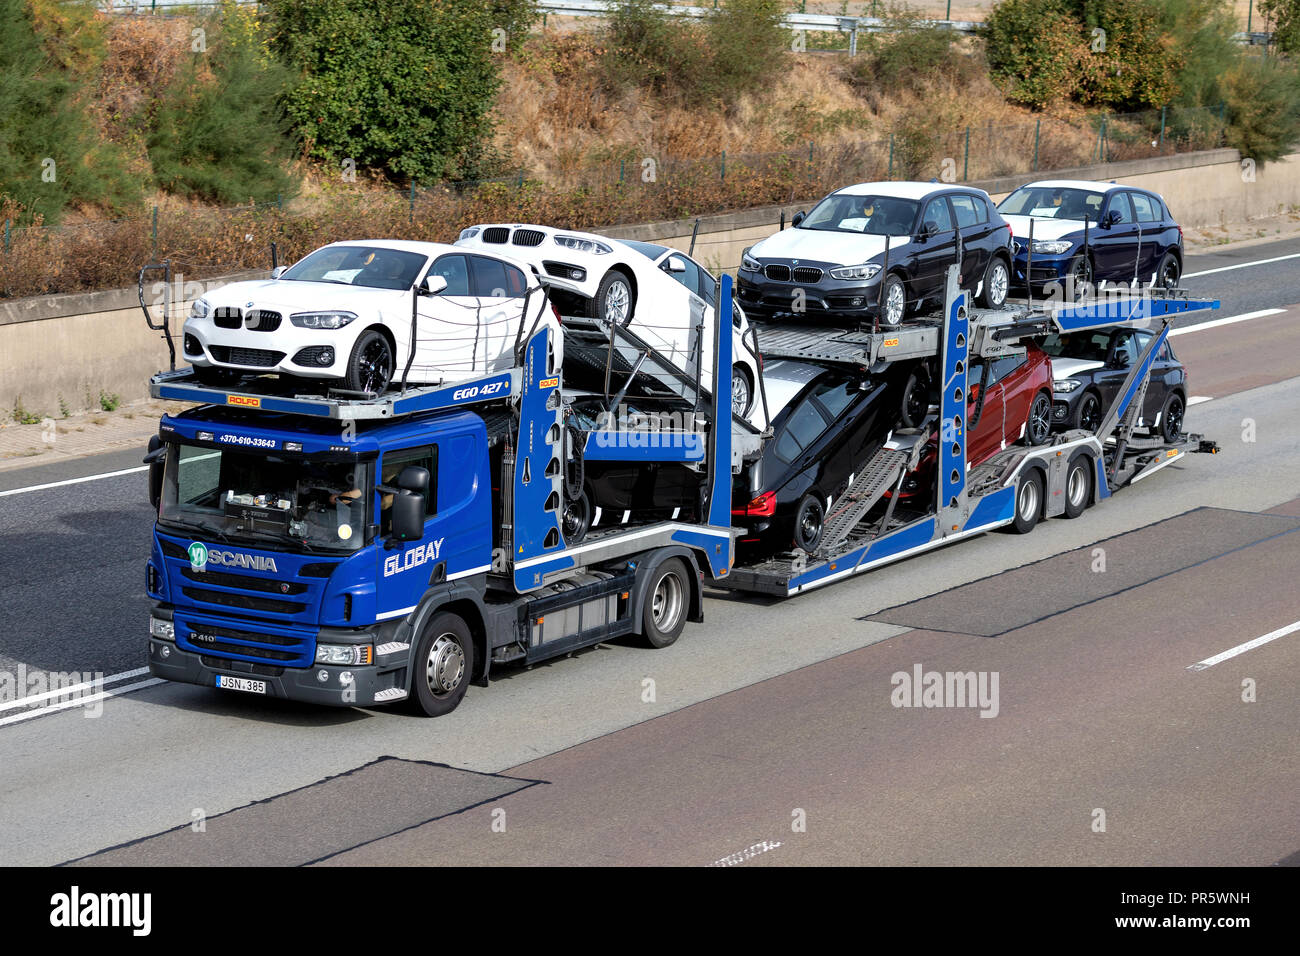 Globay truck on motorway. Globay is group of companies that provide automobile logistics solutions for car manufacturers, dealers and used car sellers Stock Photo